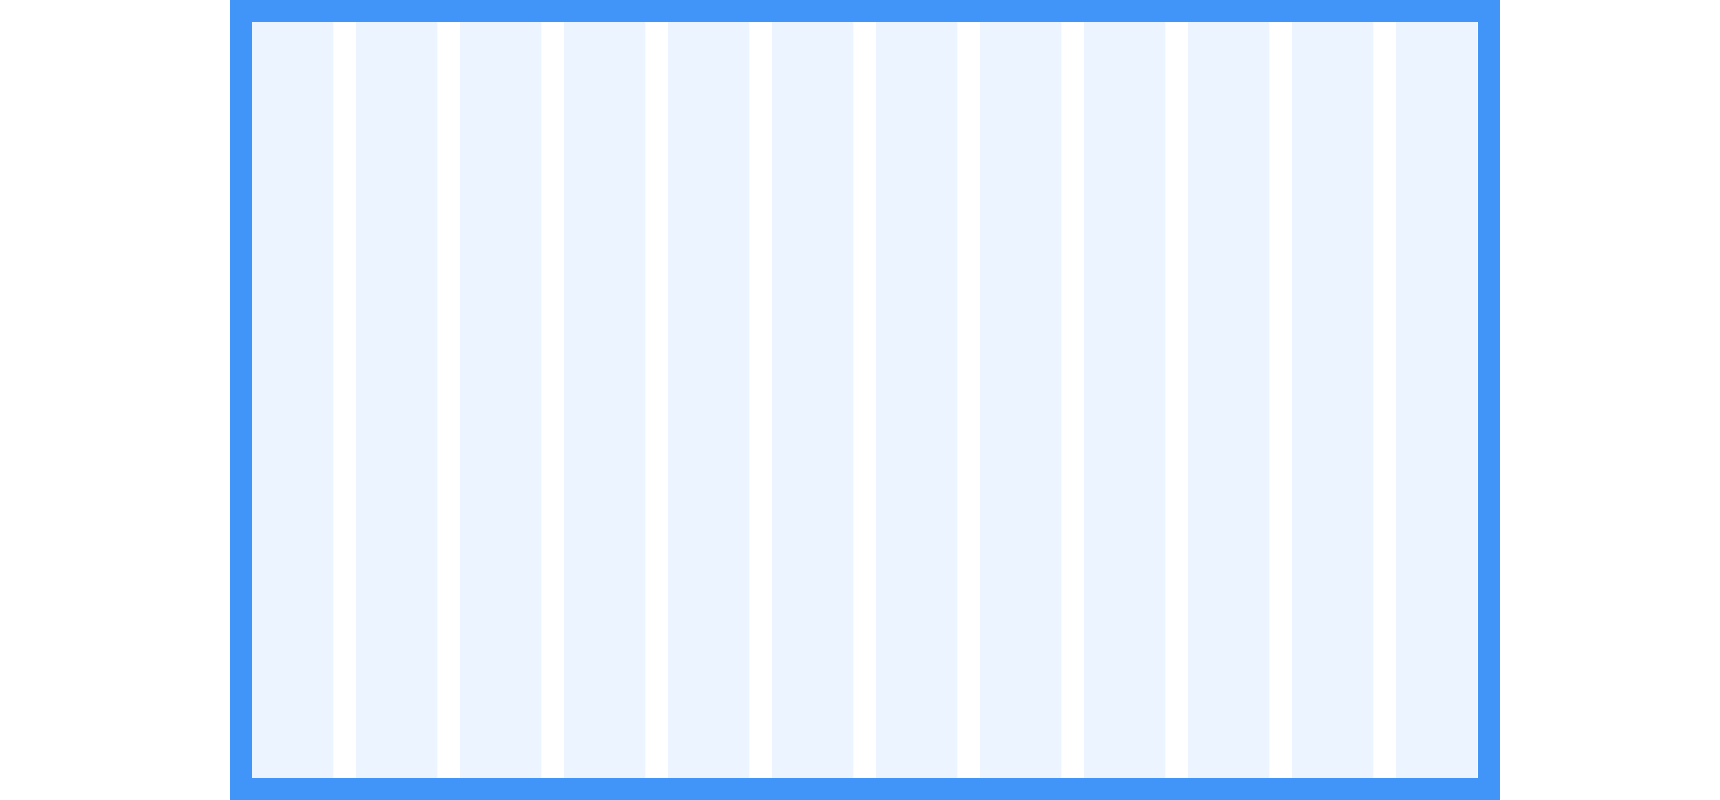 Top, right, bottom, and left spacing surrounding the perimeter of a grid container.